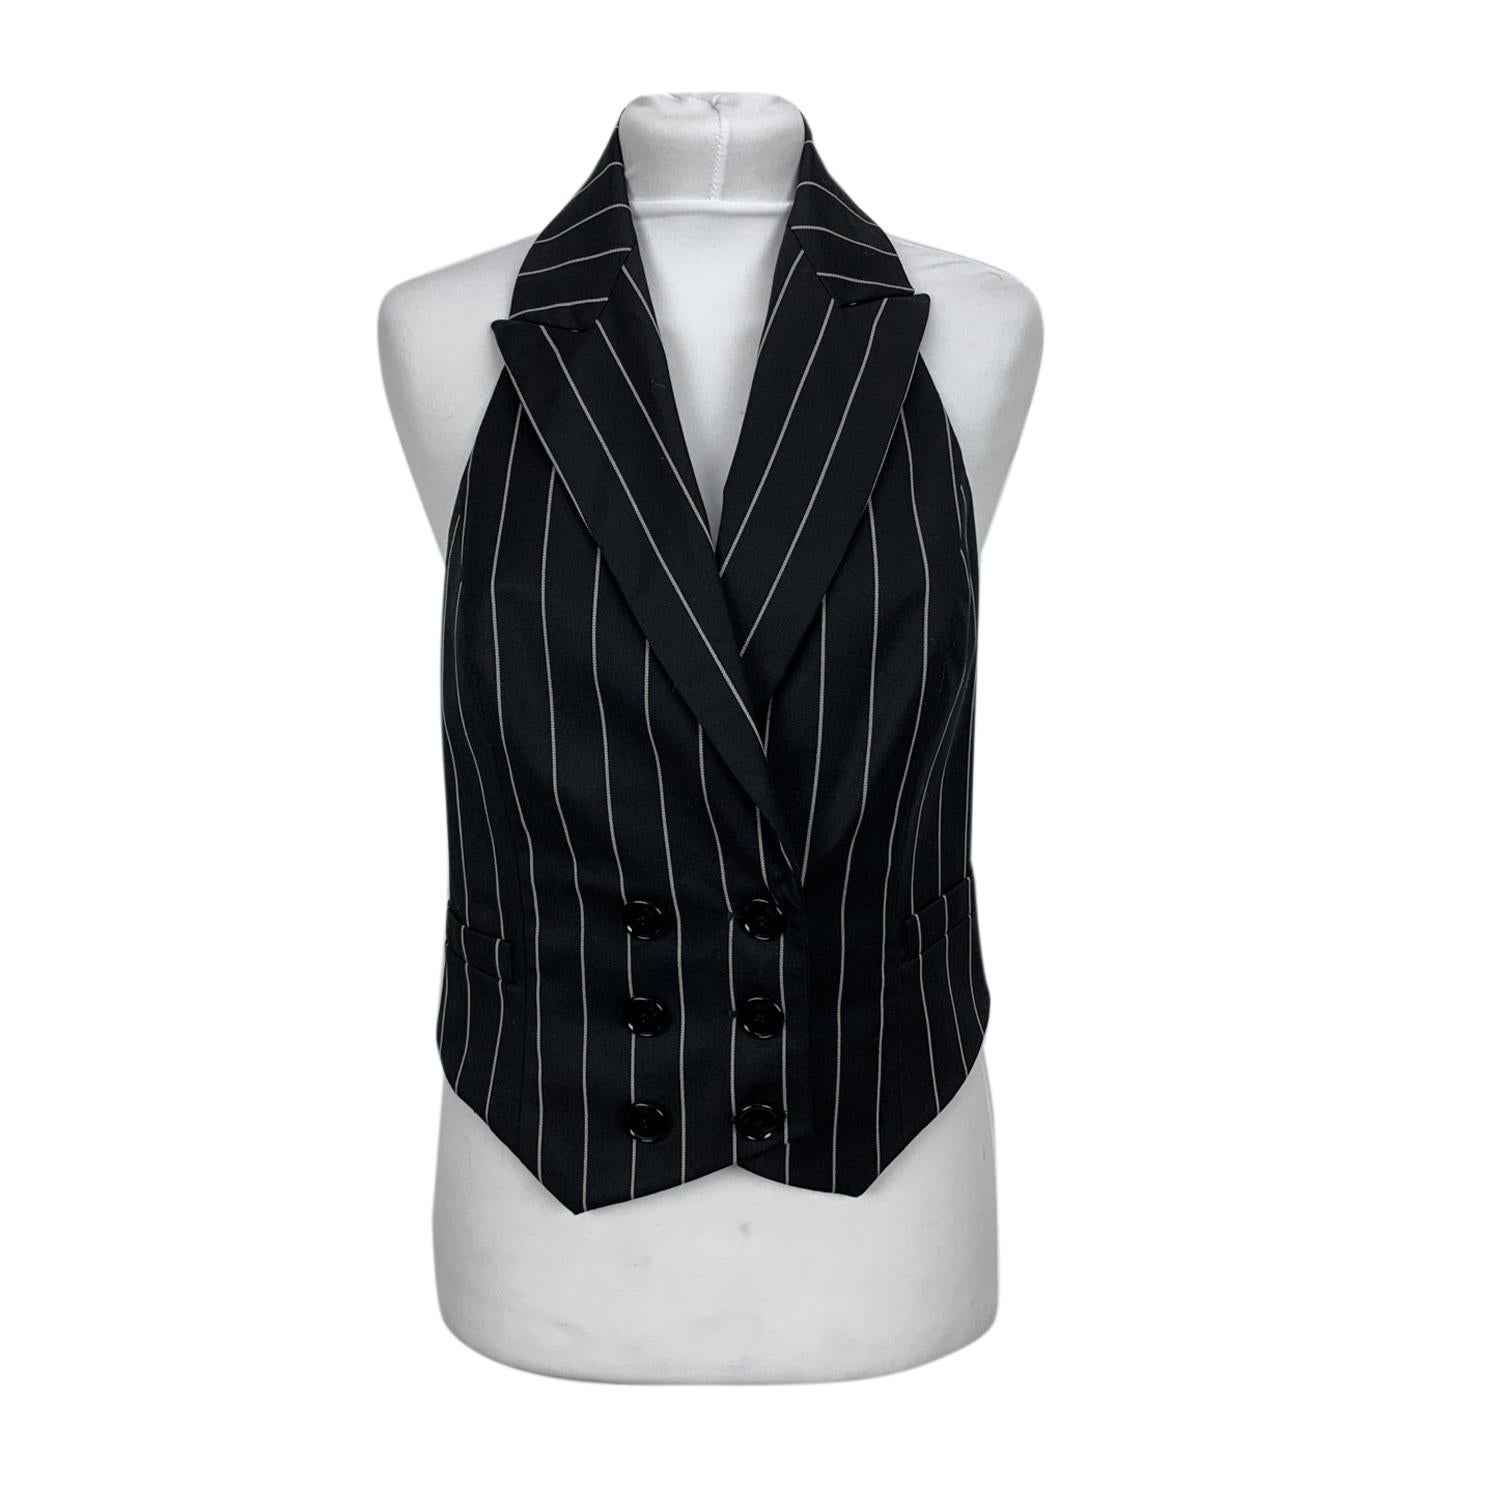 Christian Dior pinstriped vest. The vest features a double-breasted and backless design. Composition: 100% wool. Size: 38 F, 10 GB, 42 IT, 36 D, 6 USA (The size shown for this item is the size indicated by the designer on the label). It should